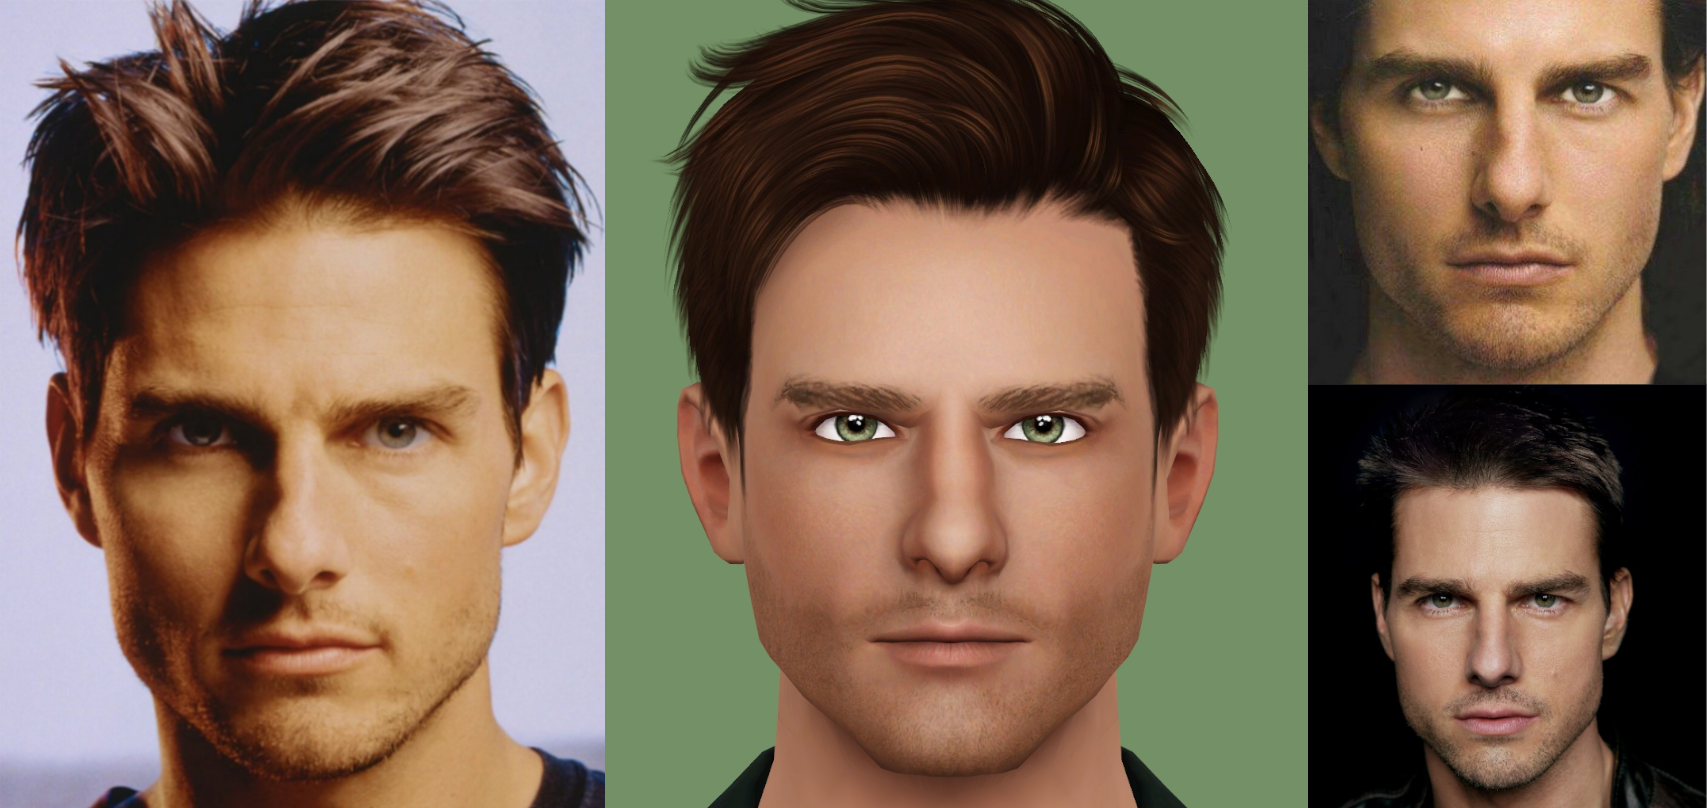 Mod The Sims - Tom Cruise